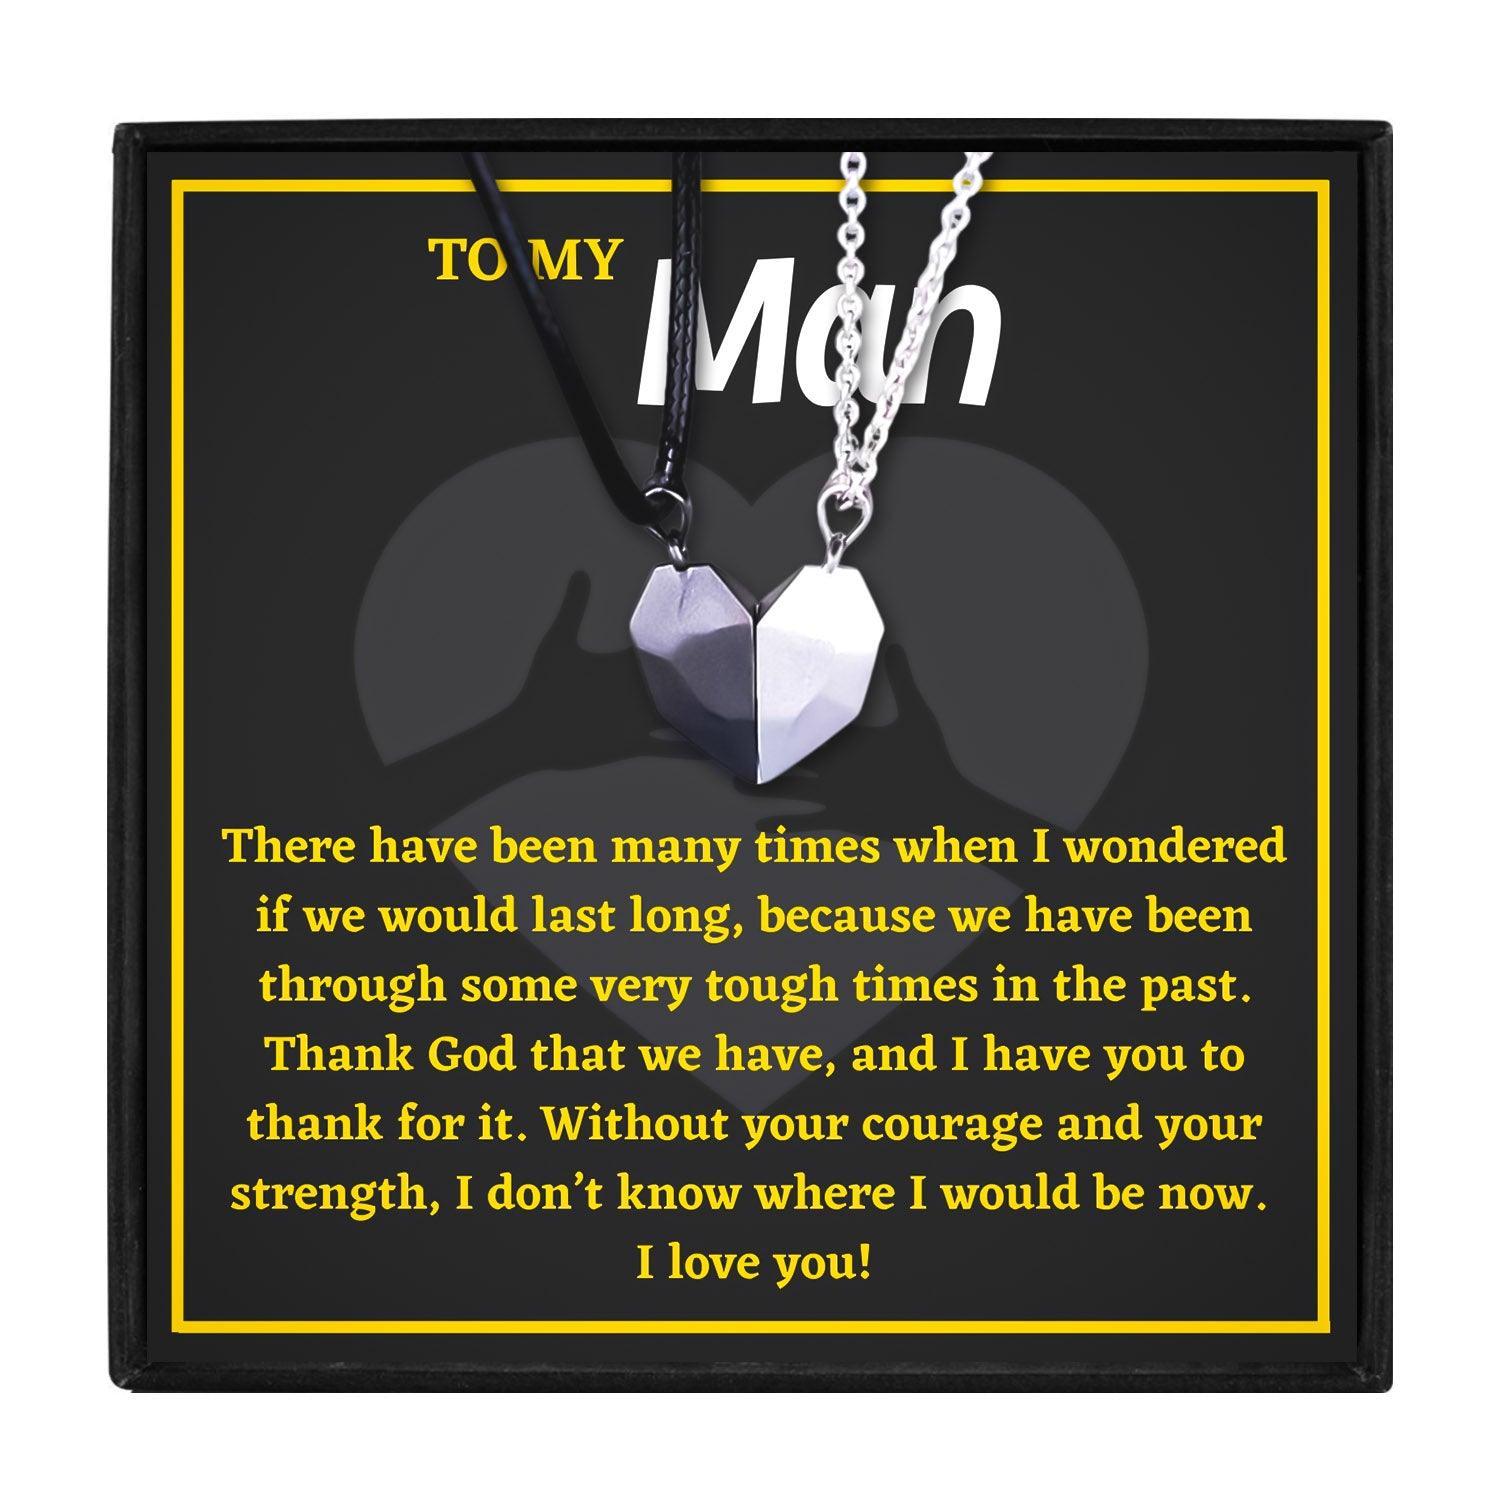 Matching Couple Necklaces For My Hubby for Christmas 2023 | Matching Couple Necklaces For My Hubby - undefined | birthday gift for hubby, birthday ideas for husband, husband gift ideas, Matching Relationship Necklaces for Husband, My Husband Necklace | From Hunny Life | hunnylife.com